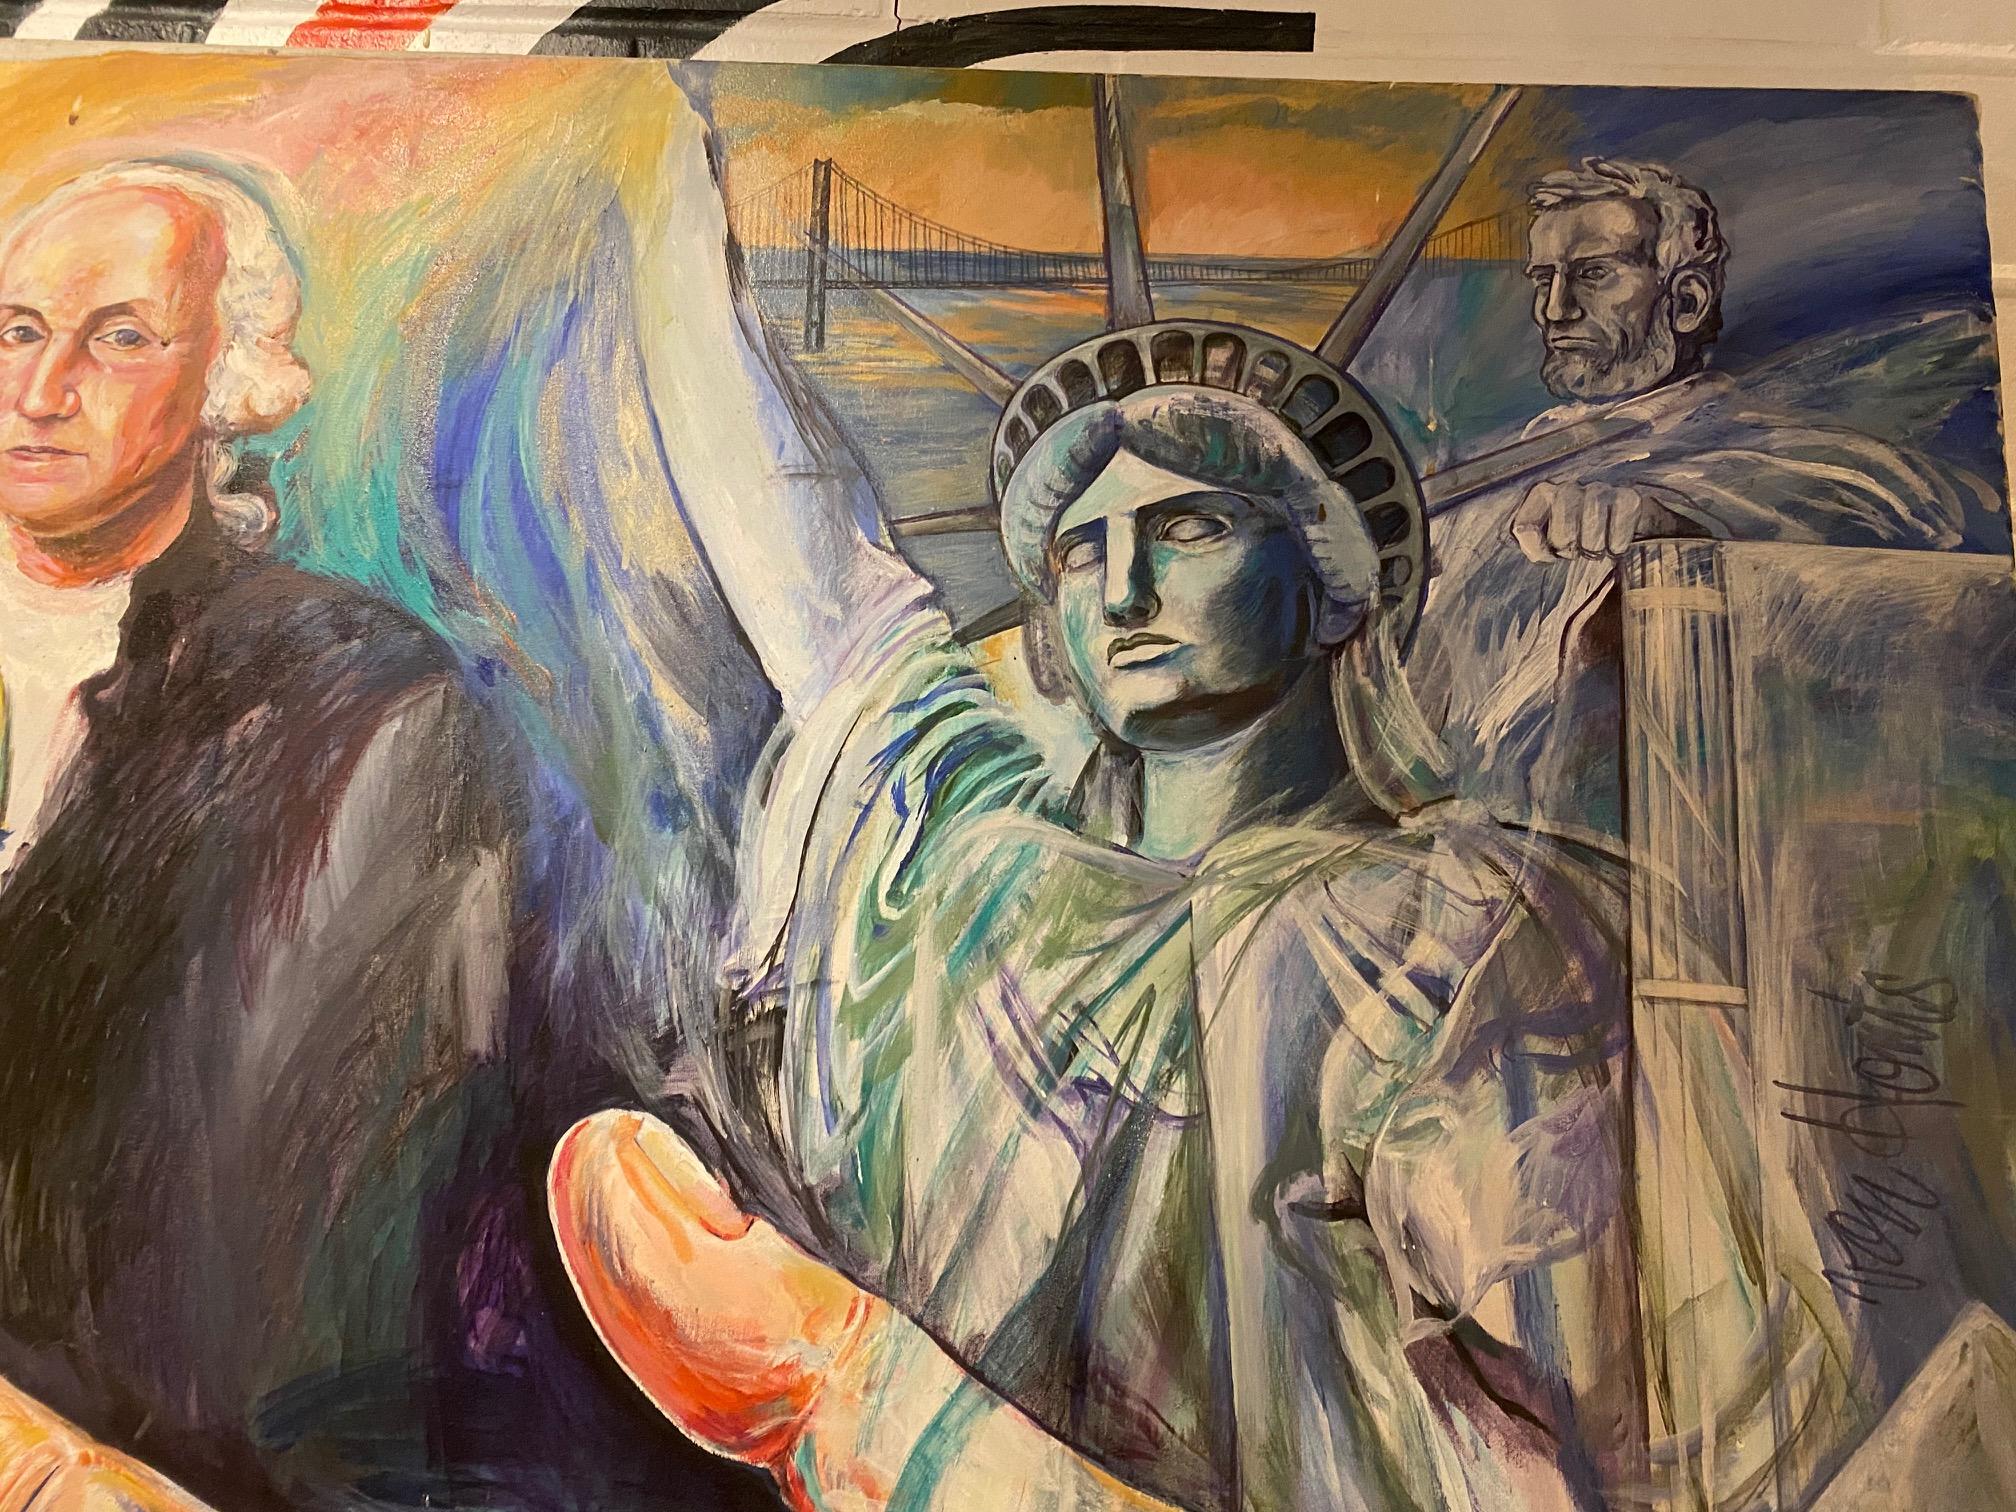 Large painting for the Partners of Americas International Convention in 1980 by Texas artist Jacqui Von Honts. Jacqui Von Honts had outstanding creative talent and was well-versed in a variety of mediums in art.